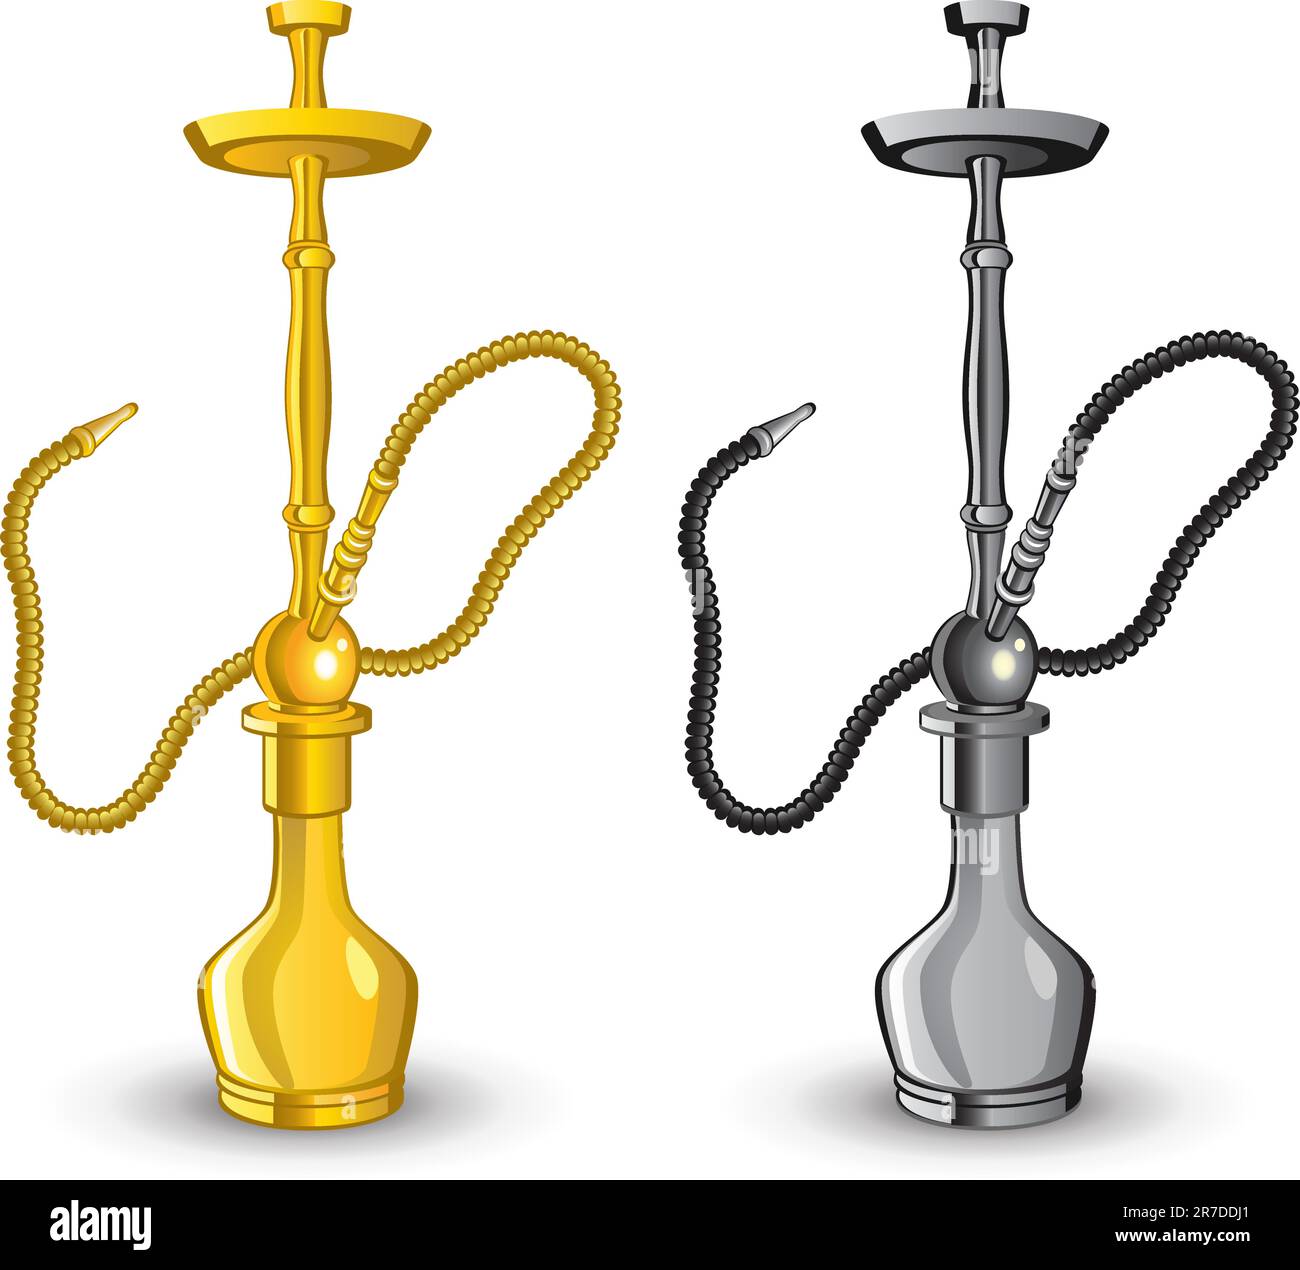 Isolated image of hookah. Vector illustration. Stock Vector